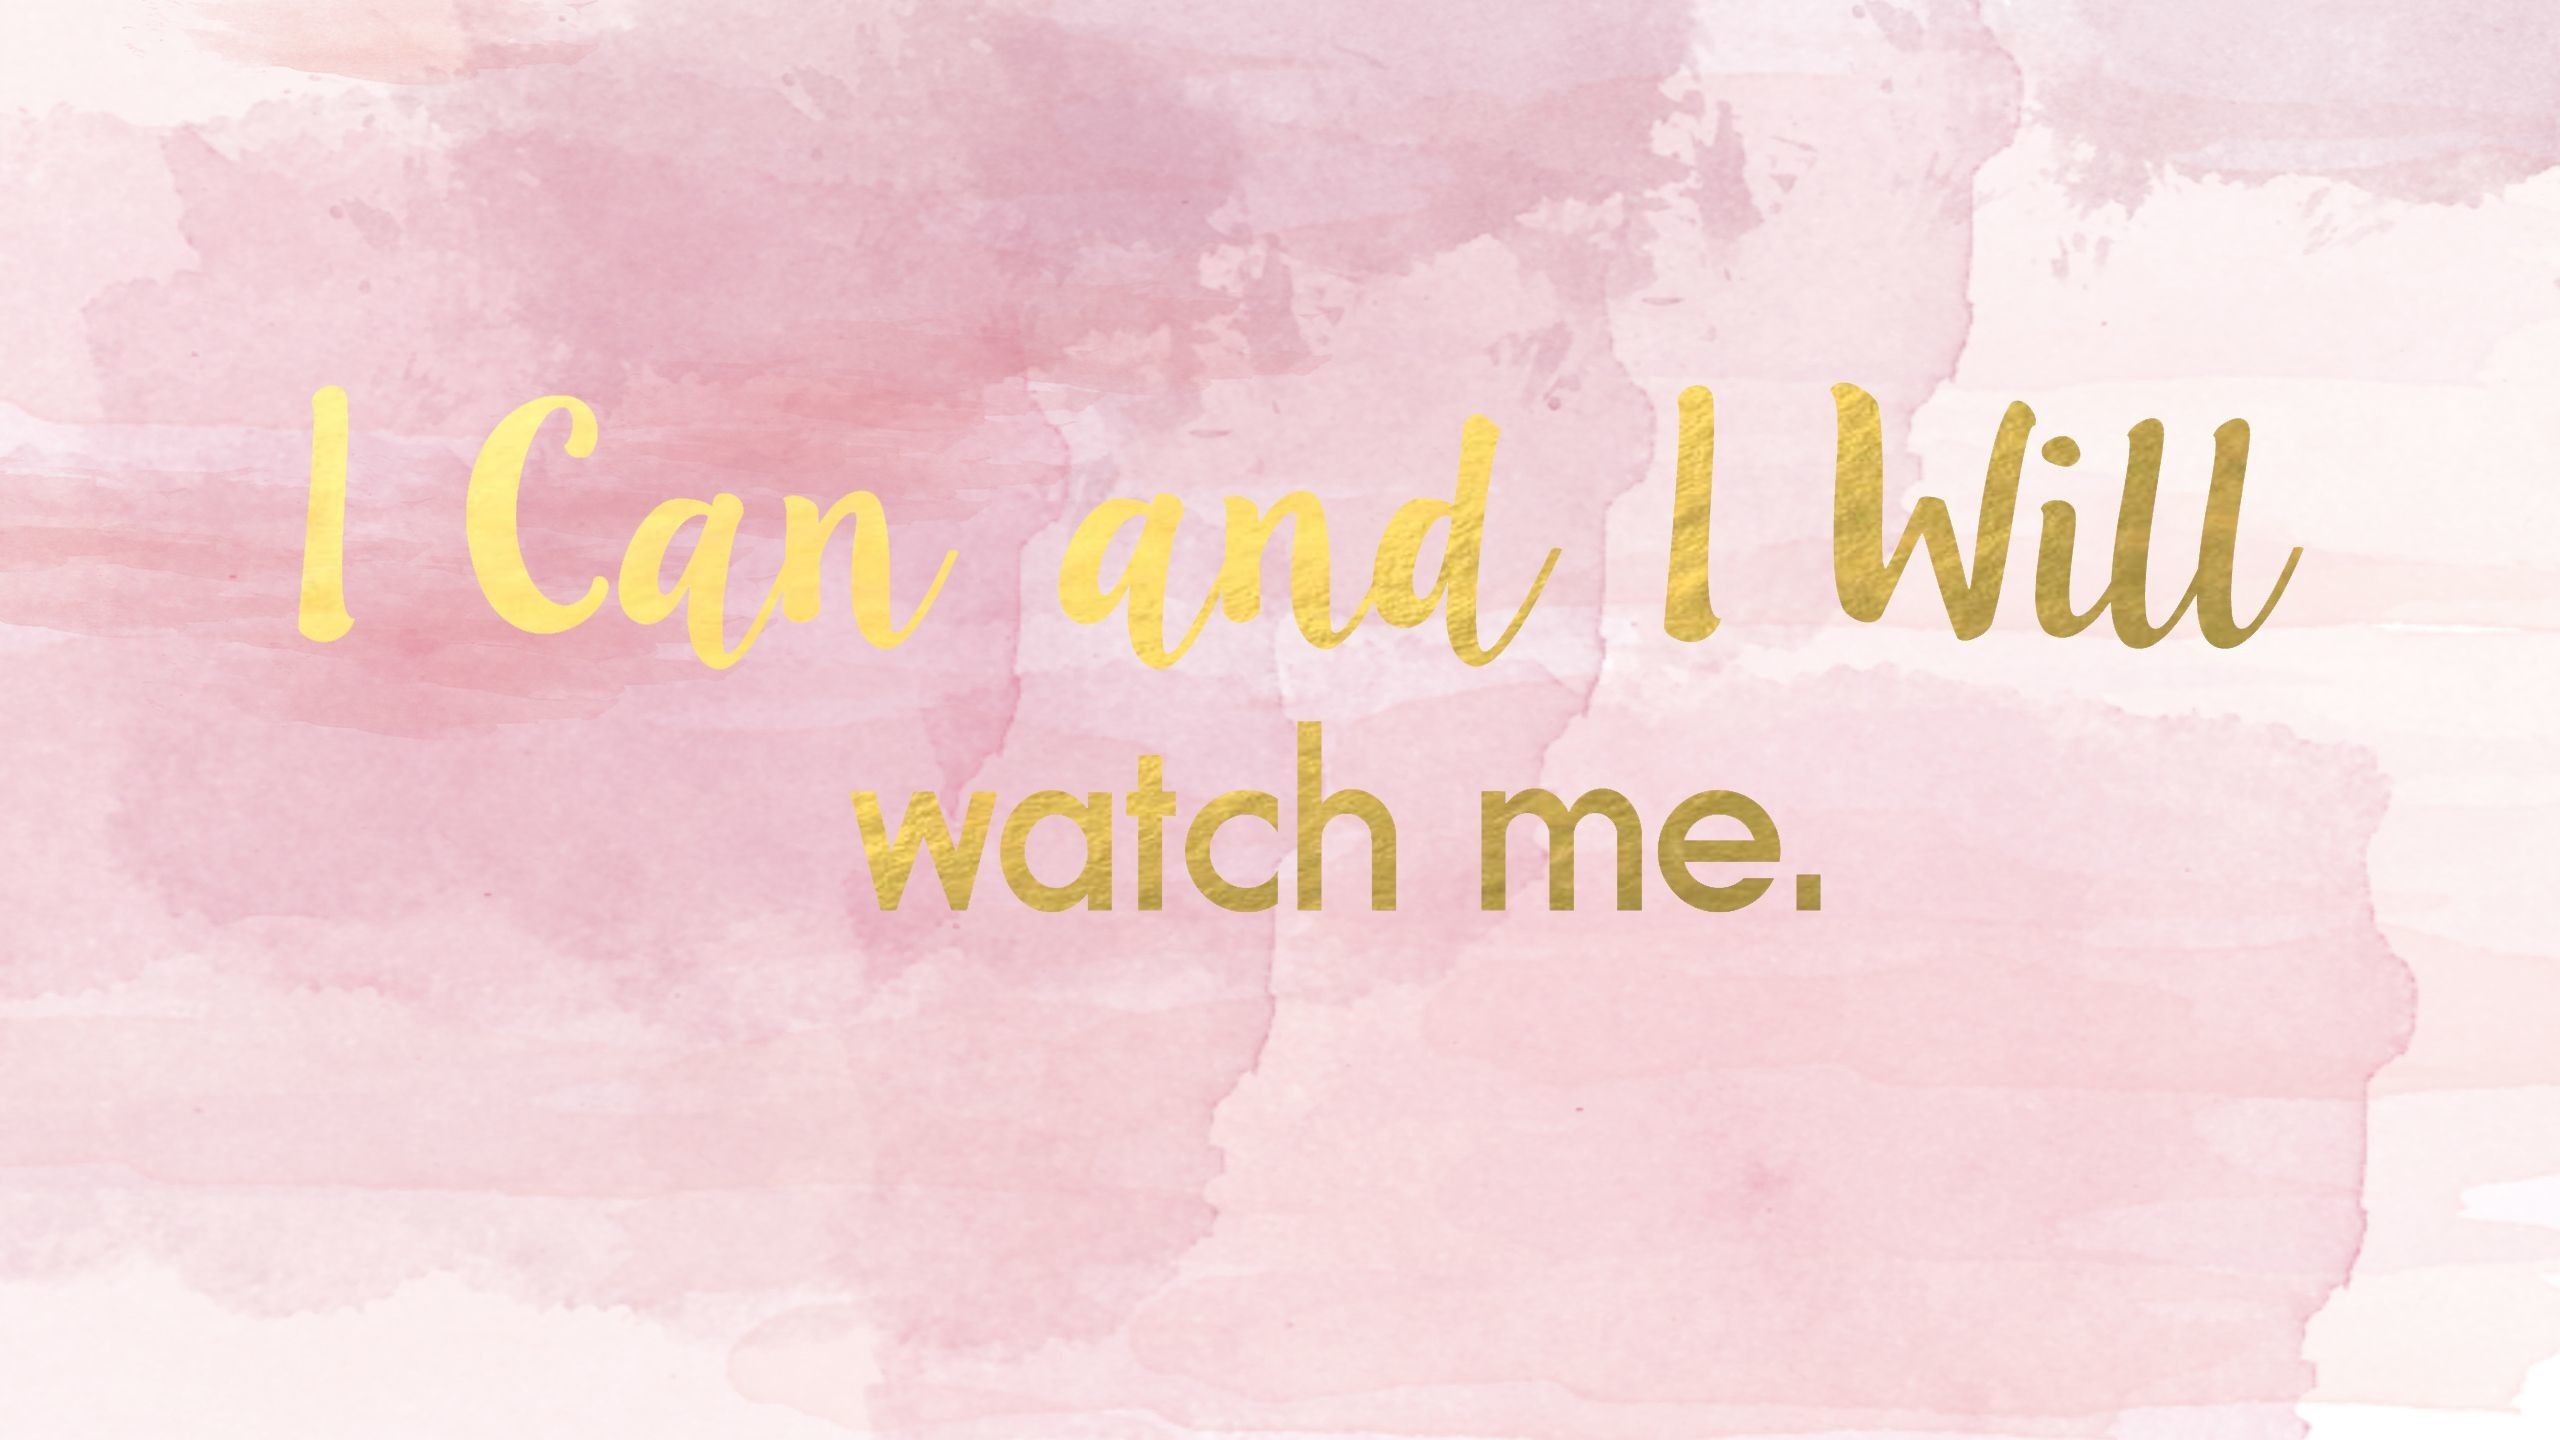 Rose gold wallpaper, I can and I will watch me.